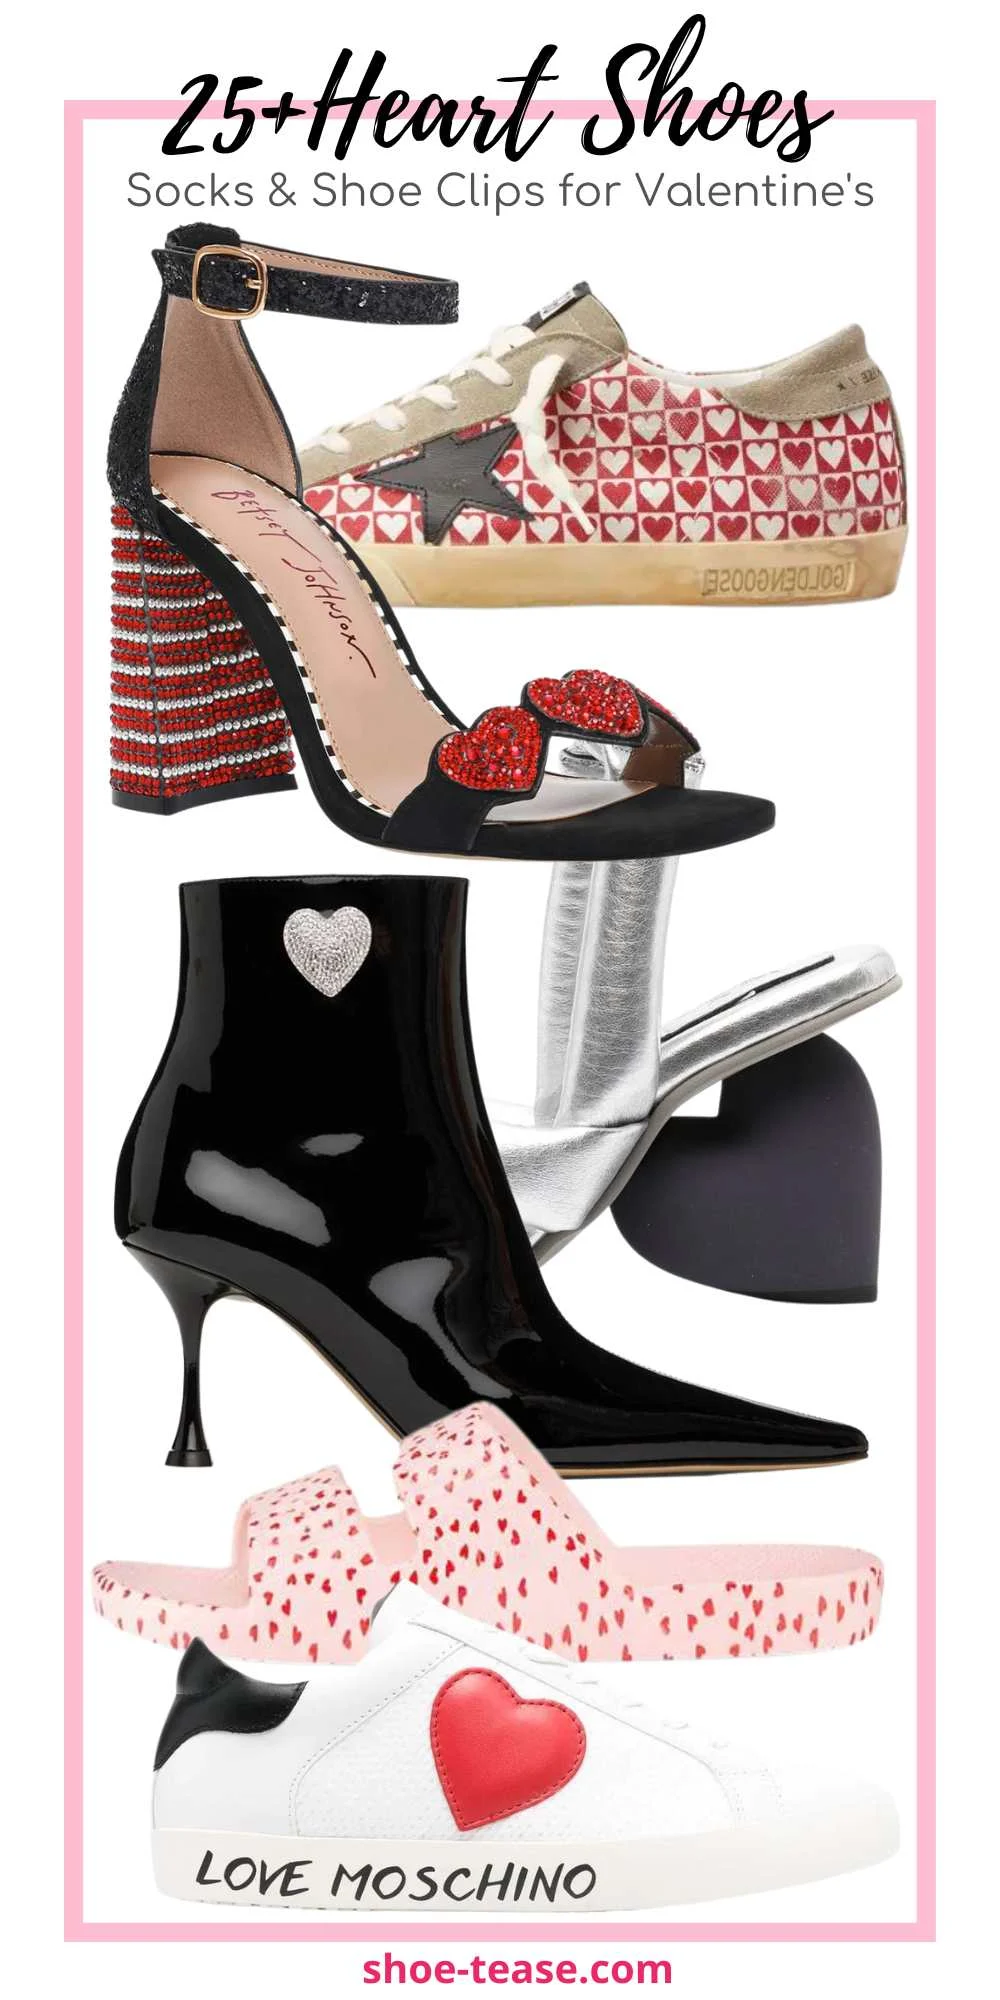 Collage of 6 heart shoes with text above reading 25+ heart shoes and socks and shoe clips for Valentine's.